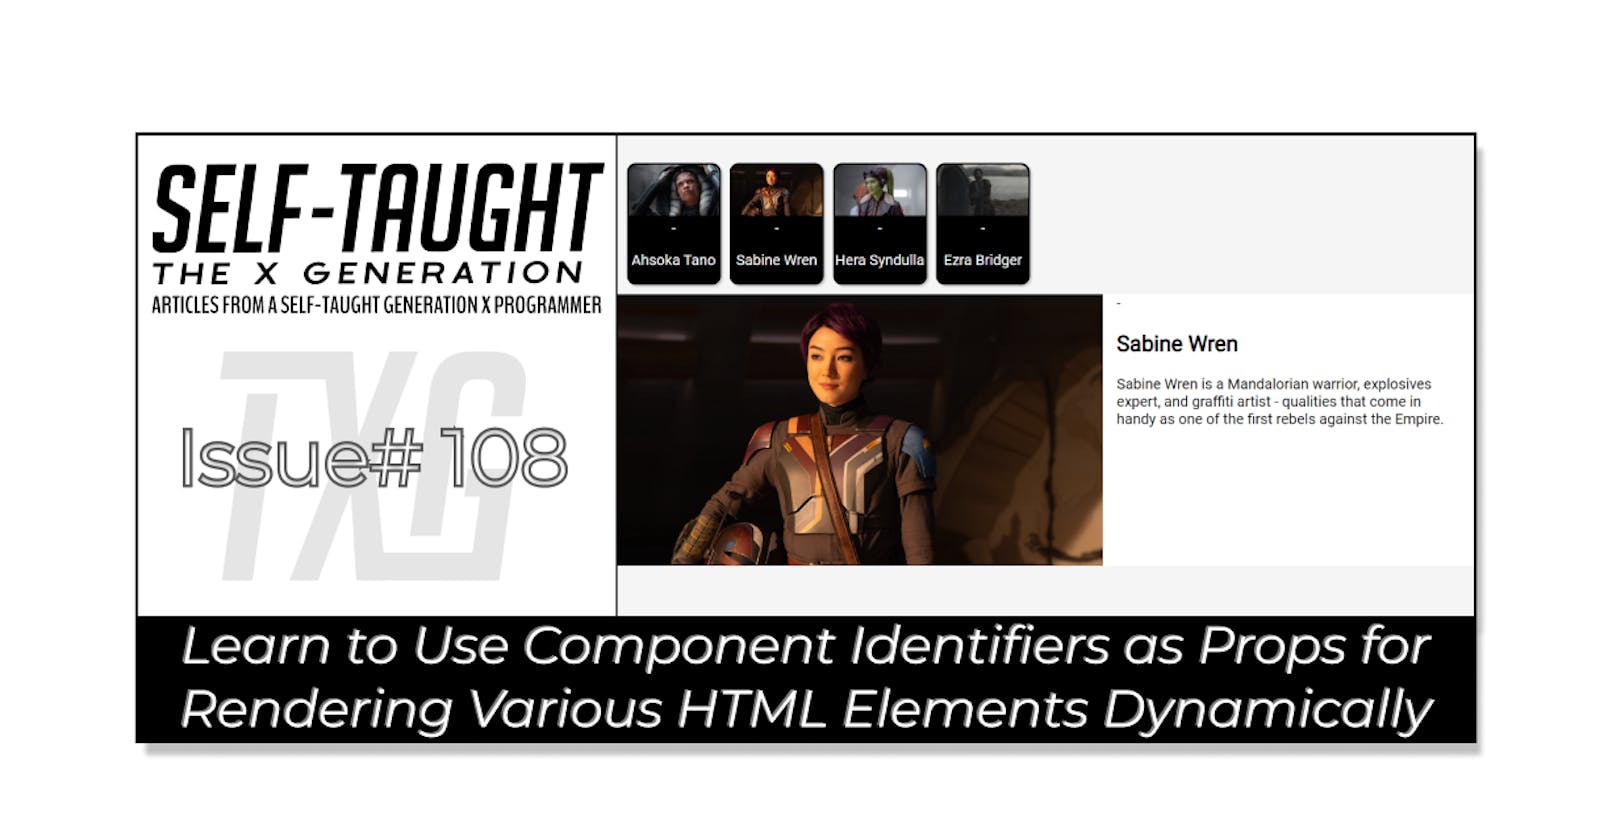 Learn to Use Component Identifiers as Props for Rendering Various HTML Elements Dynamically